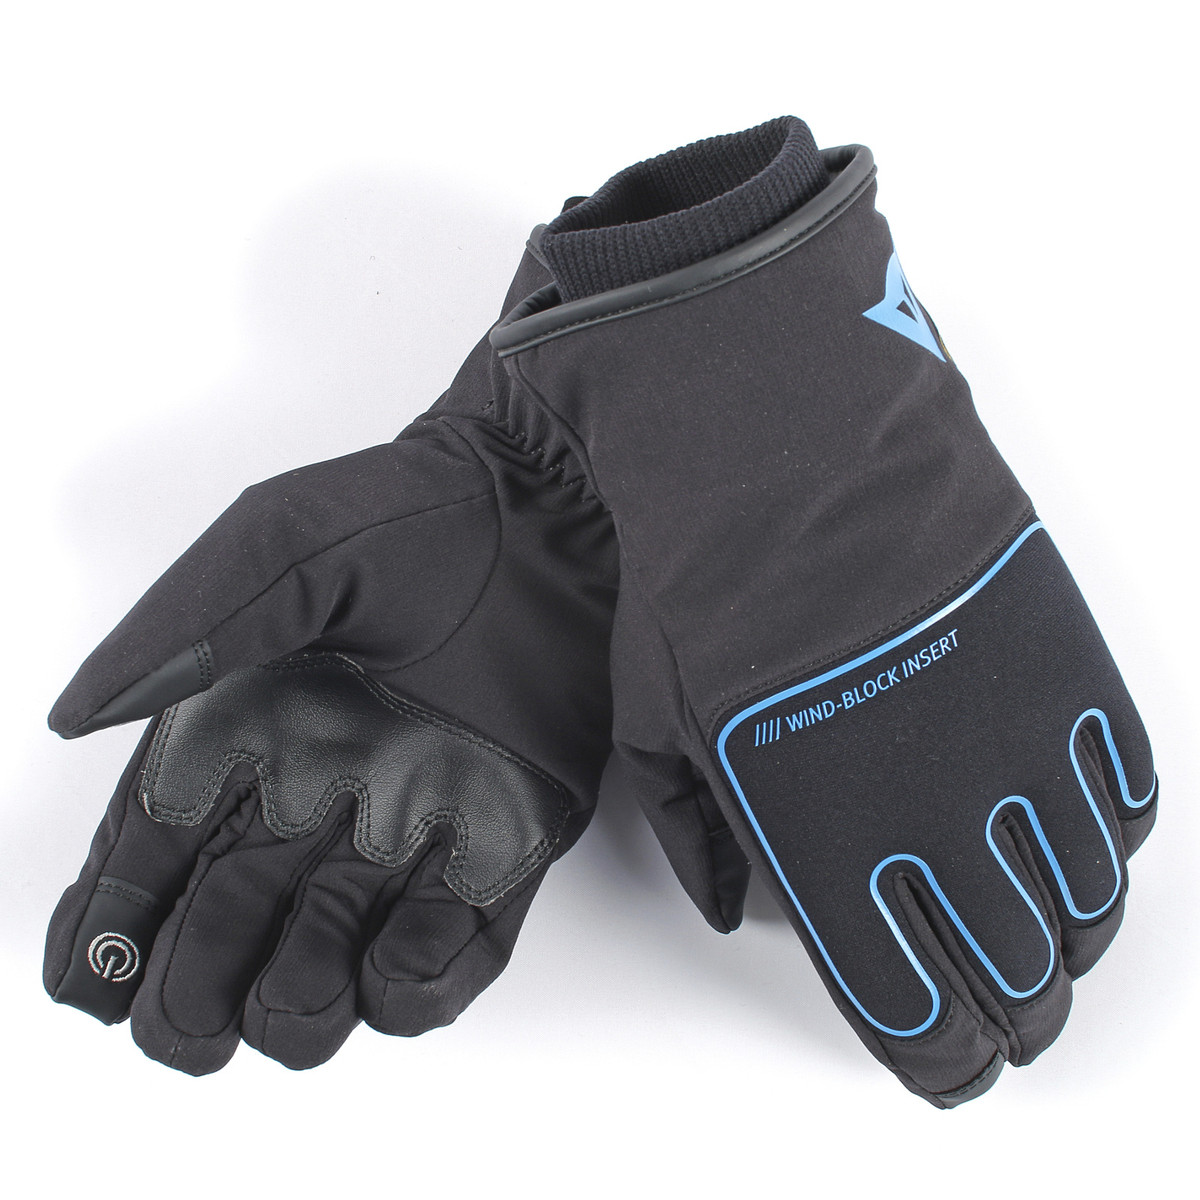 Motorcycle Glove Plaza D Dry D Garage Dainese Official Shop